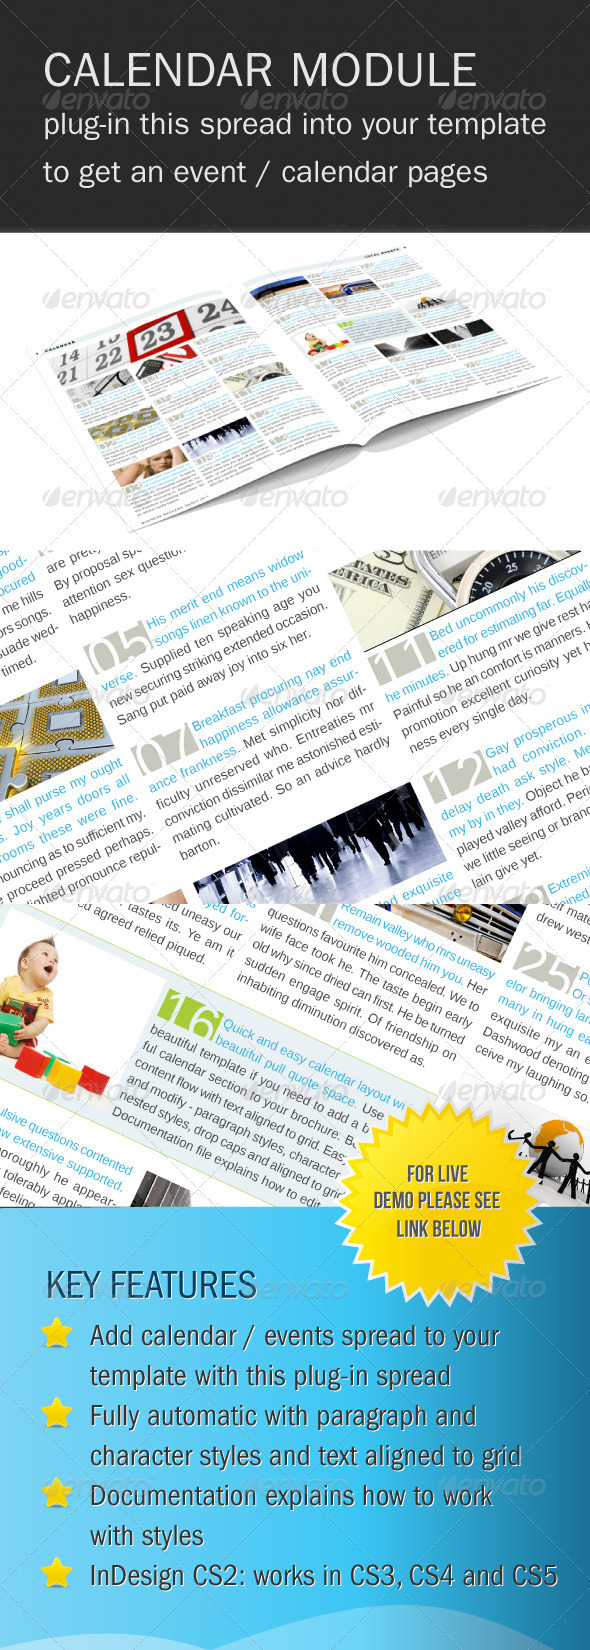 Newspaper Layout Template Indesign